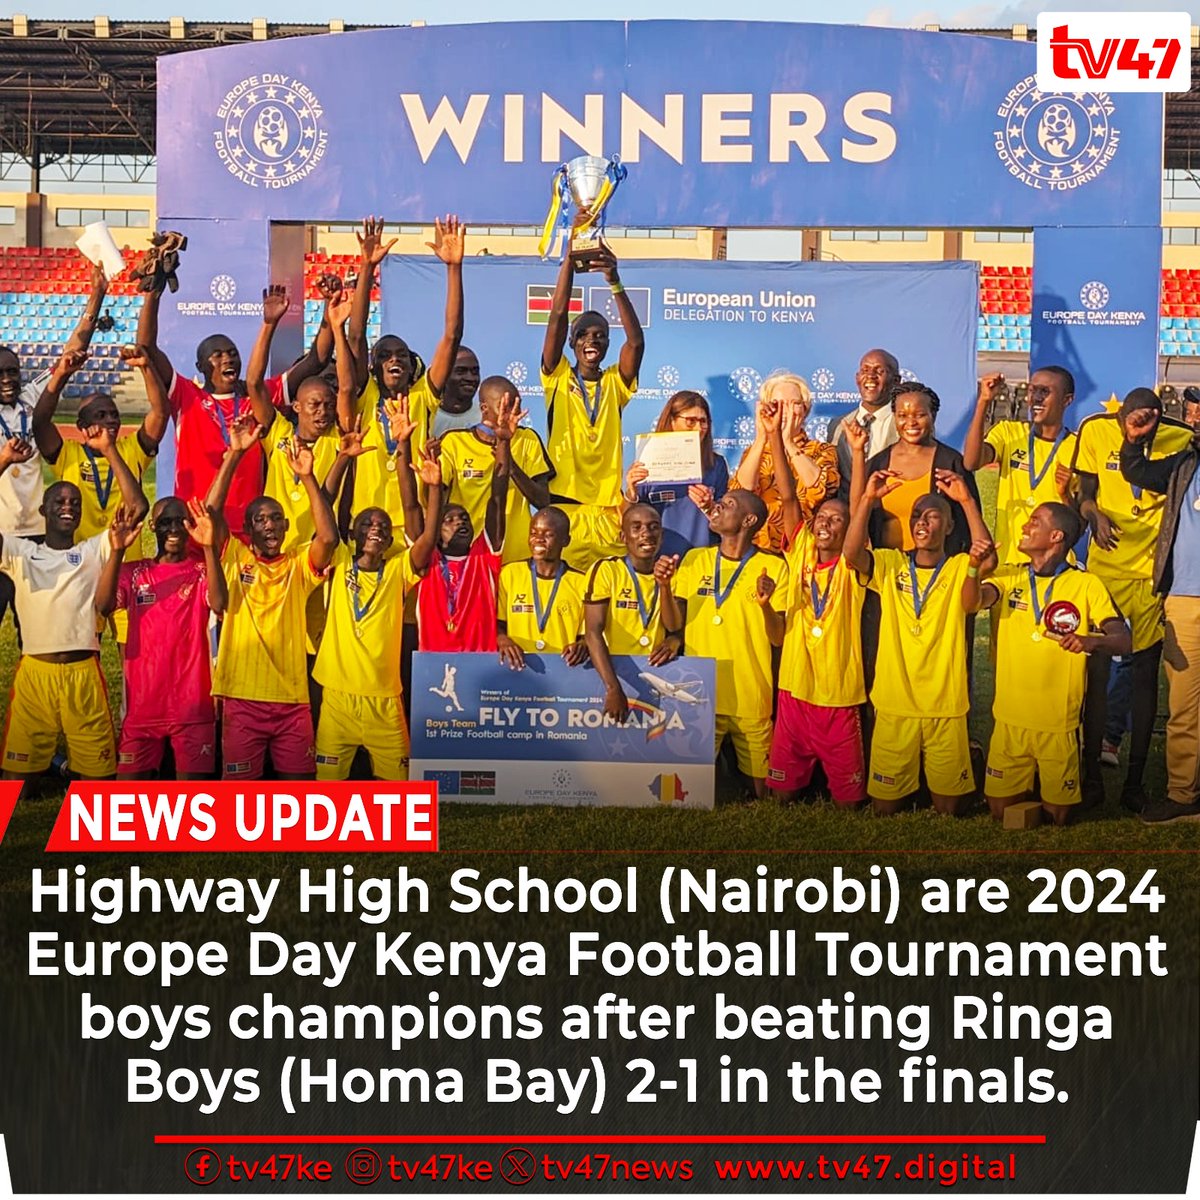 Highway High School (Nairobi) are 2024 #EuropeDayKenya Football Tournament boys champions after beating Ringa Boys (Homa Bay) 2-1 in the finals. The finals of the tournament -- meant to celebrate youth, diversity and the unifying power of football -- took place at Ulinzi